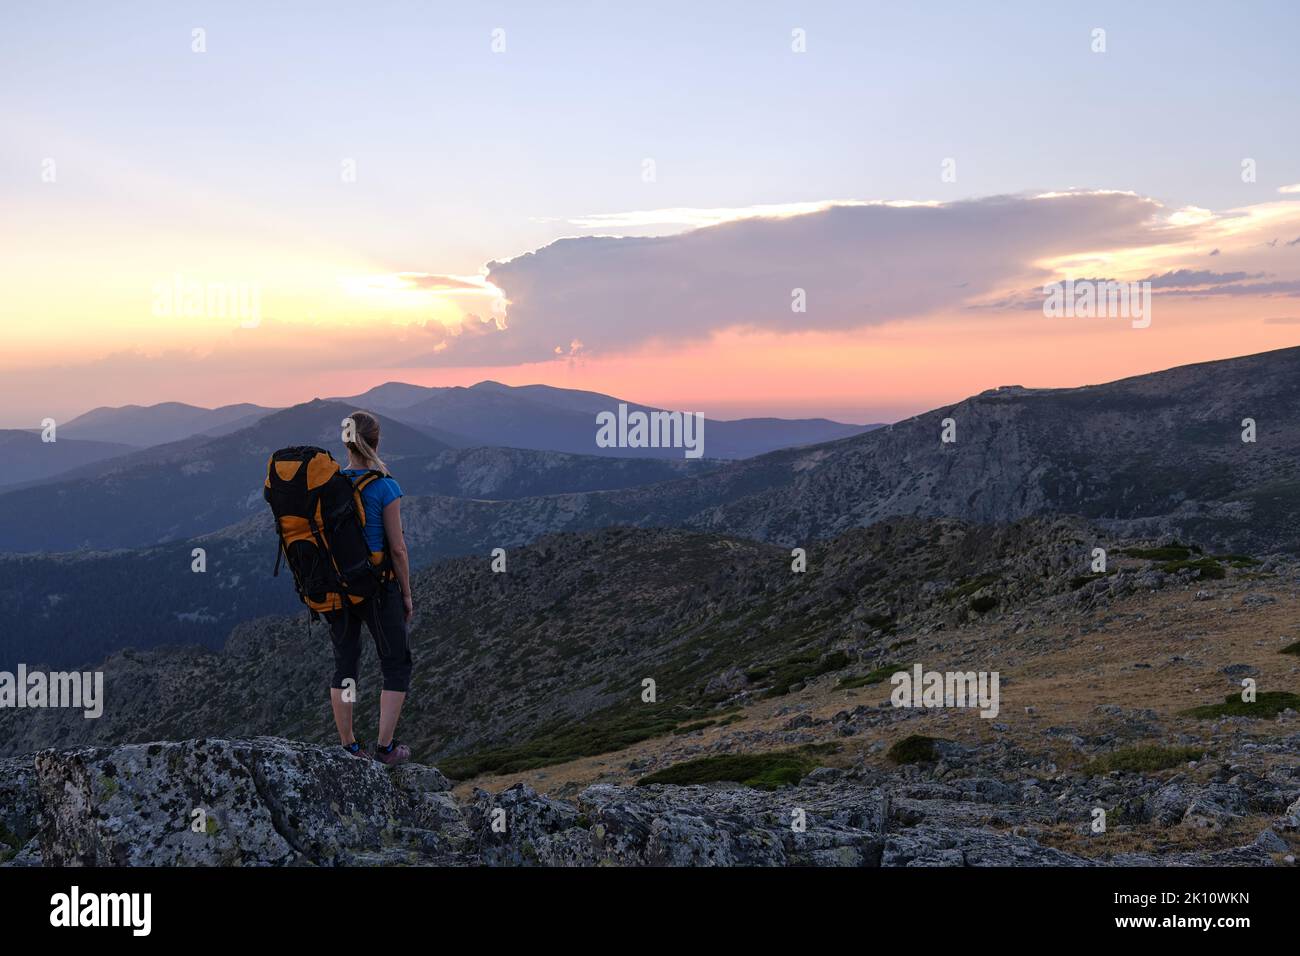 A Female backpacker admiring mountains at sunset Stock Photo